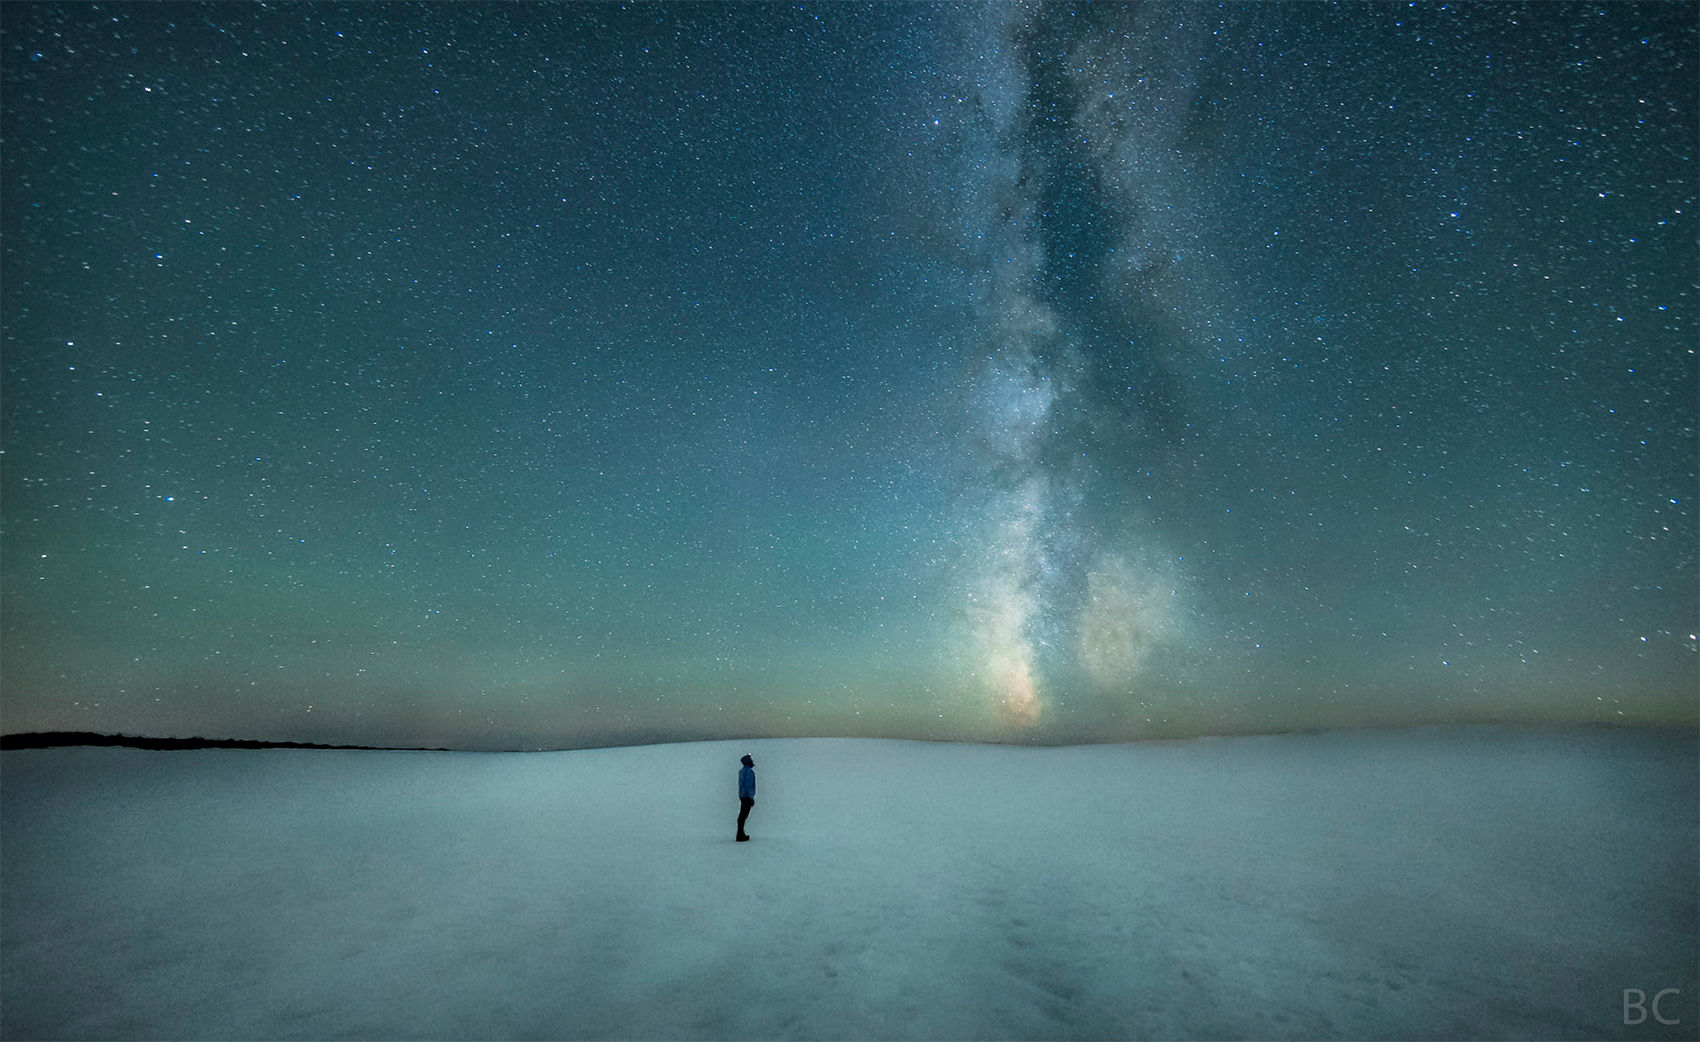 The Universe is big. We are not. Credit: Ben Canales